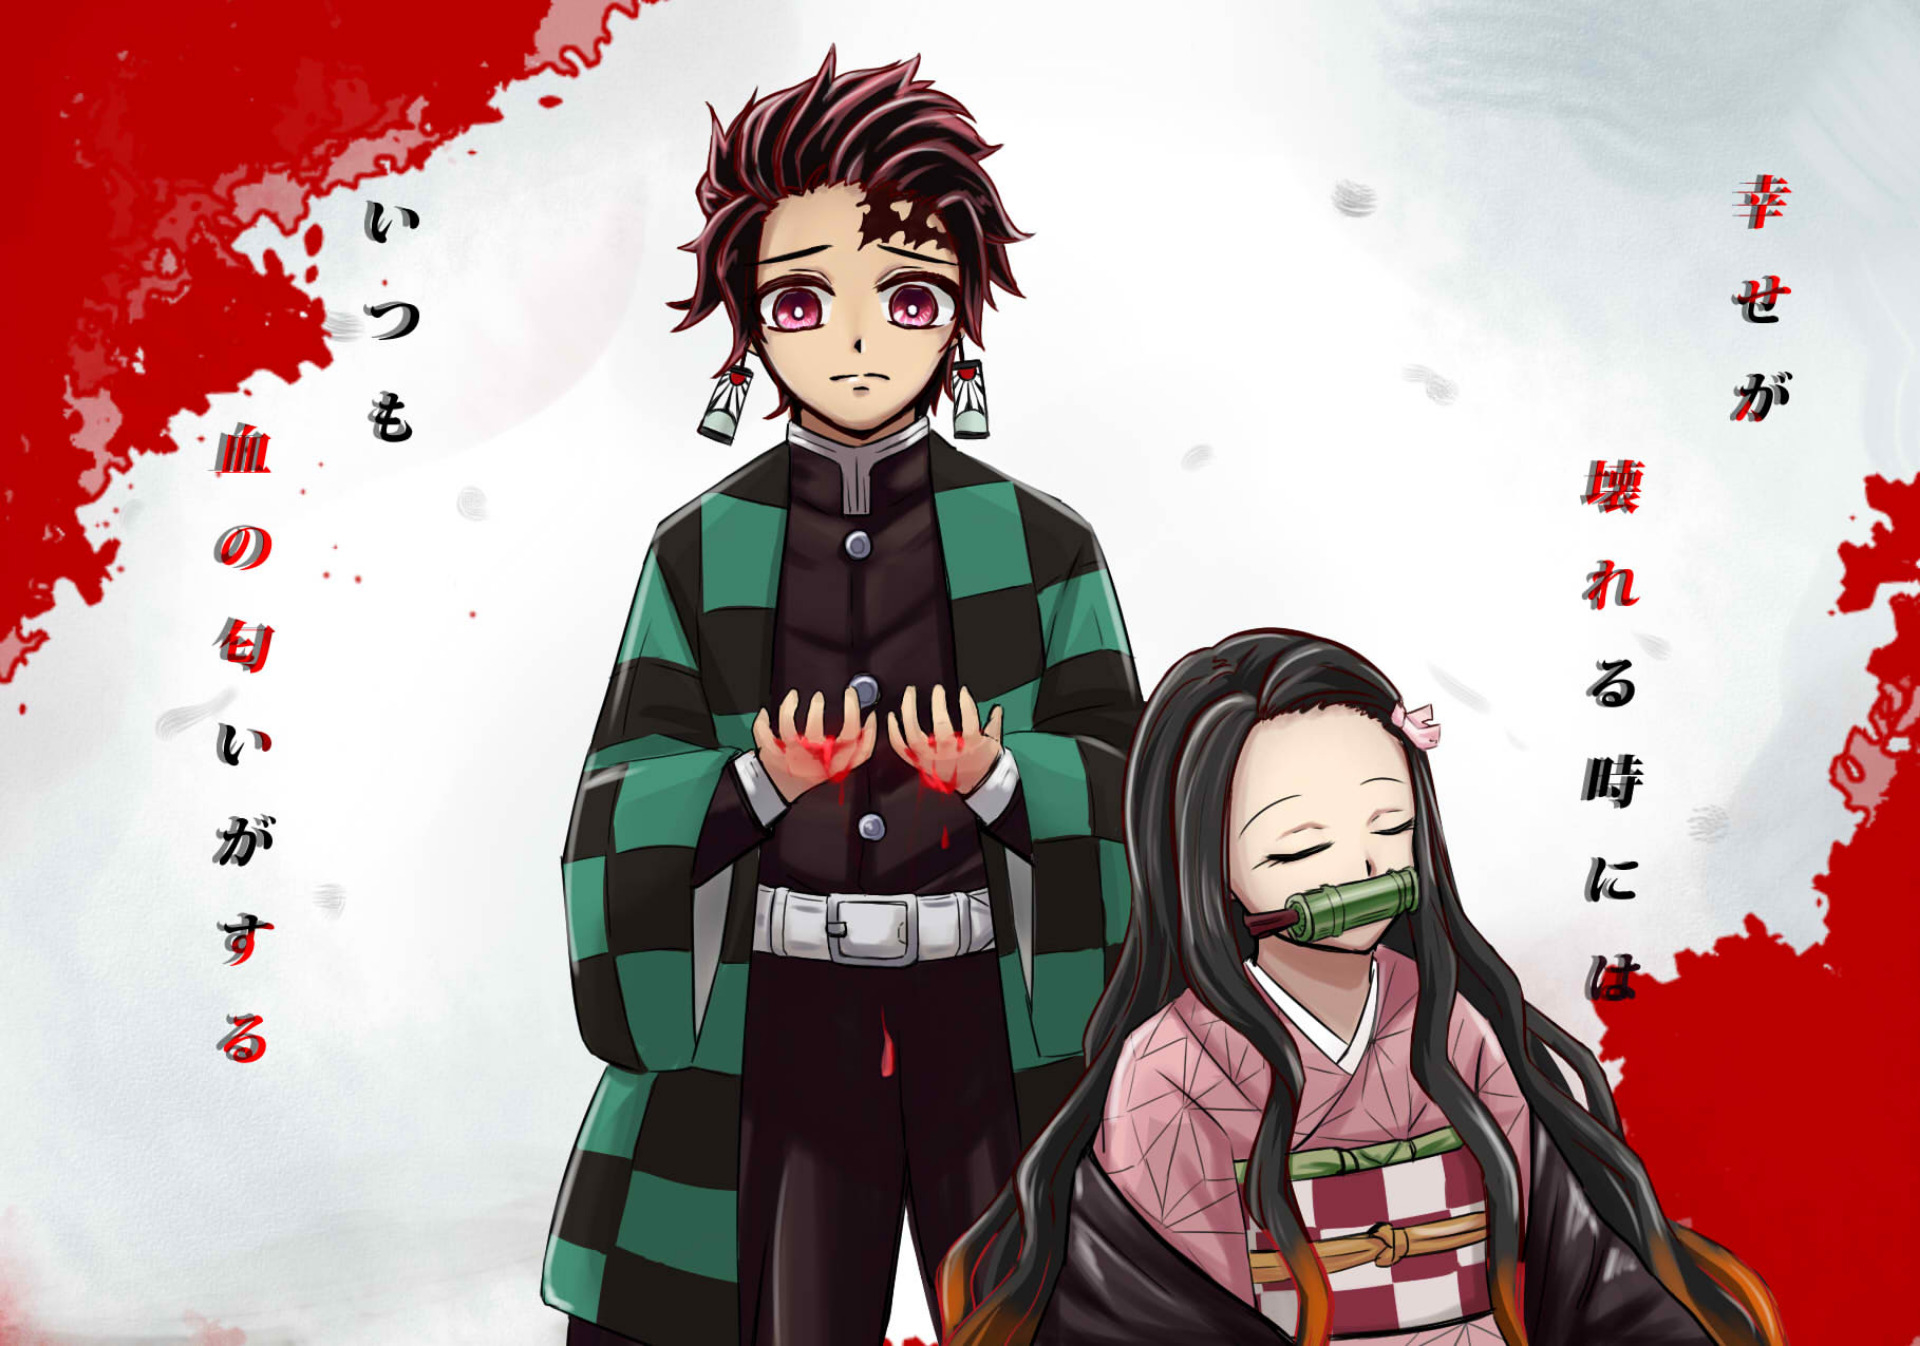 Demon Slayer Kimetsu no Yaiba Chapter 197 Release Date, Raw Scans and Read Online